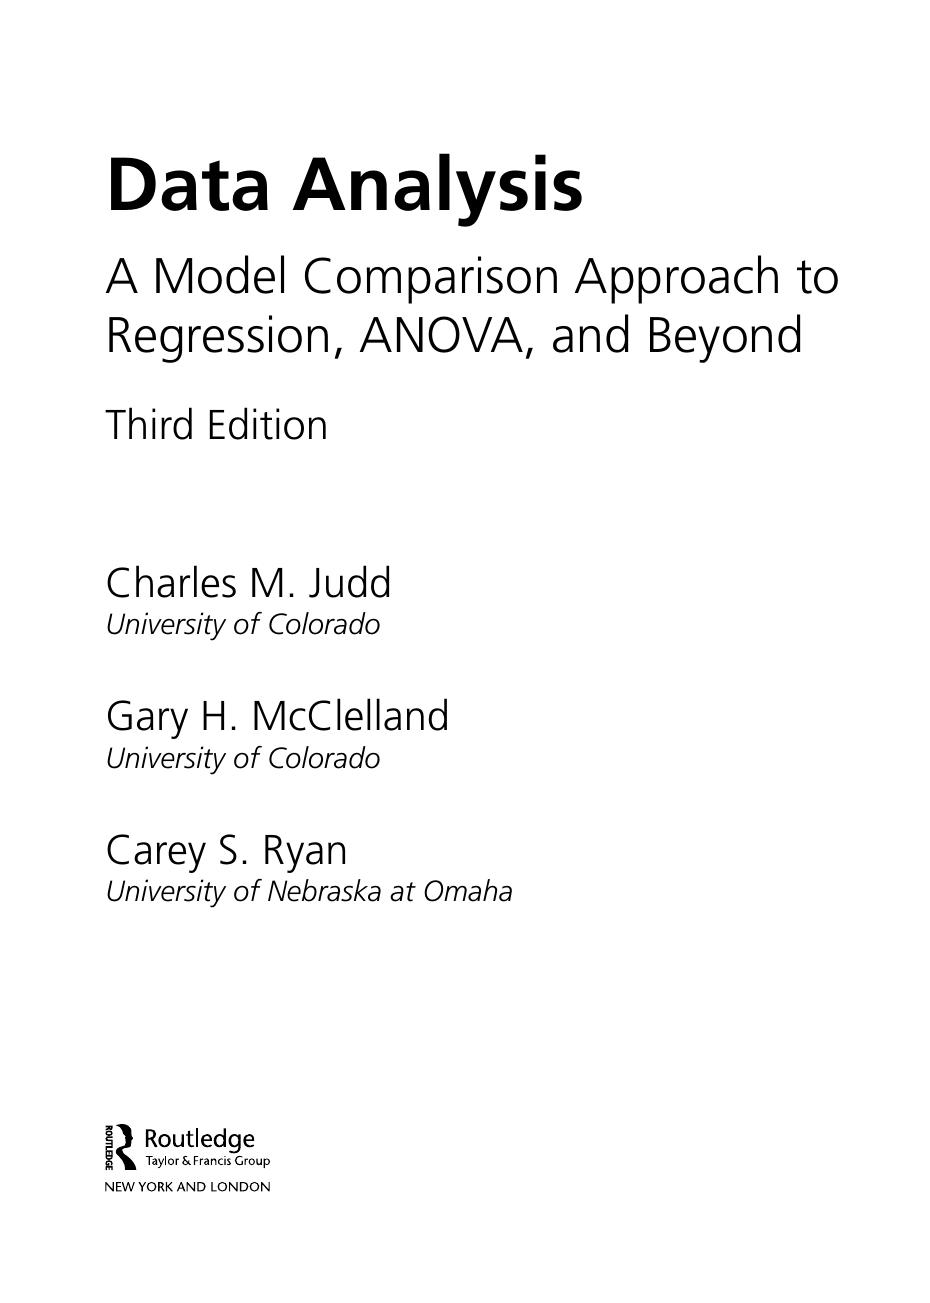 Data Analysis. A Model Comparison Approach to Regression, ANOVA and beyond 3rd ed. 2017.pdf